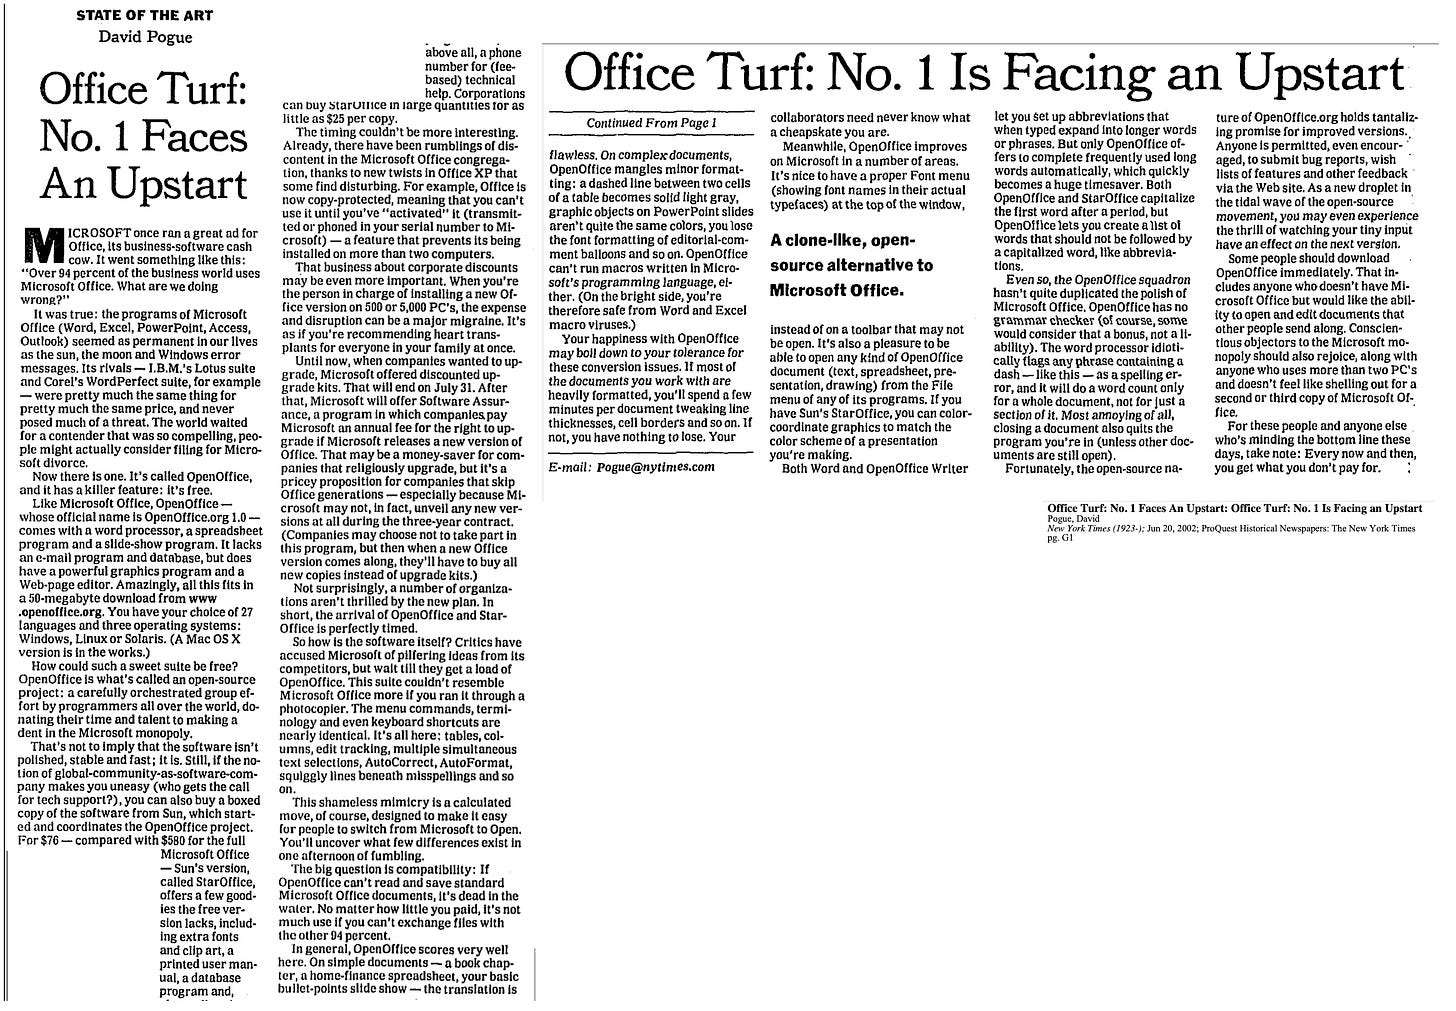 Office Turf: No. 1 Faces An Upstart ICROSOFT once ran a great ad for Office, Its business-software cash cow. It went something like this: "Over 94 percent of the business world uses Microsoft office. What are we doing turon) It was true: the programs of Microsoft Office (Word, Excel, PowerPoint, Access, Outlook) seemed as permanent in our lives as the sun, the moon and Windows error messages. Its rivals -I,B.M.'s Lotus sulte and Corel's WordPerfect suite, for example - were pretty much the same thing for pretty much the same price, and never posed much of a threat. The world waited for a contender that was so compelling, peo- ple might actually consider filing for Micro- snit divorce Now there is one. It's called OpenOffice, and it has a killer feature: it's free. Like Microsoft Office, OpenOffice - whose official name is OpenOffice.org 1.0- comes with a word processor, a spreadsheet program and a slide-show program. It lacks Web-page editor. Amazingly, all this fits in a 50-megabyte download from www •openoffice.org. You have your cholce of 27 languages and three operating systems: Windows, Linux or Solaris. (A Mac OS X version is in the works.) How could such a sweet sulte be free? OpenOffice is what's called an open-source project: a carefully orchestrated group ef- fort by programmers all over the world, do- nating their time and talent to making a dent in the Microsoft monopoly.